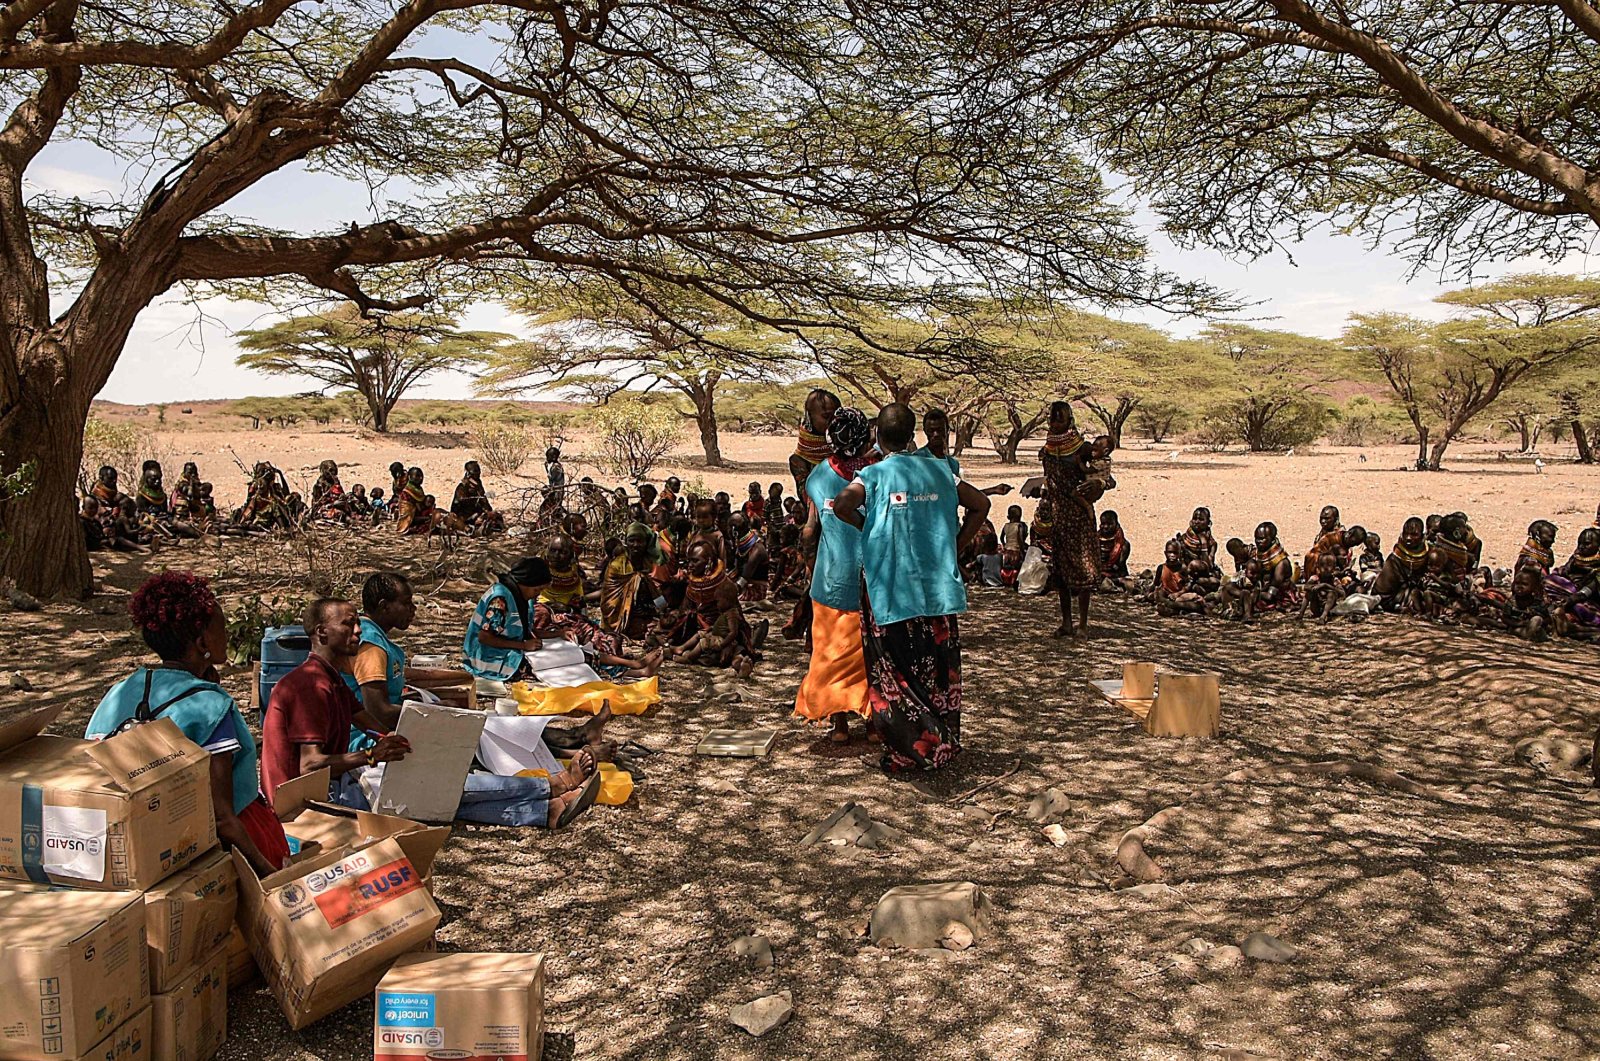 Villagers gather under a tree in Purapul village, Loiyangalani area, during World Vision-supported health interventions that help communities tackle malnutrition and other health problems caused by drought, in Marsabit, northern Kenya, July 12, 2022. (AFP Photo)